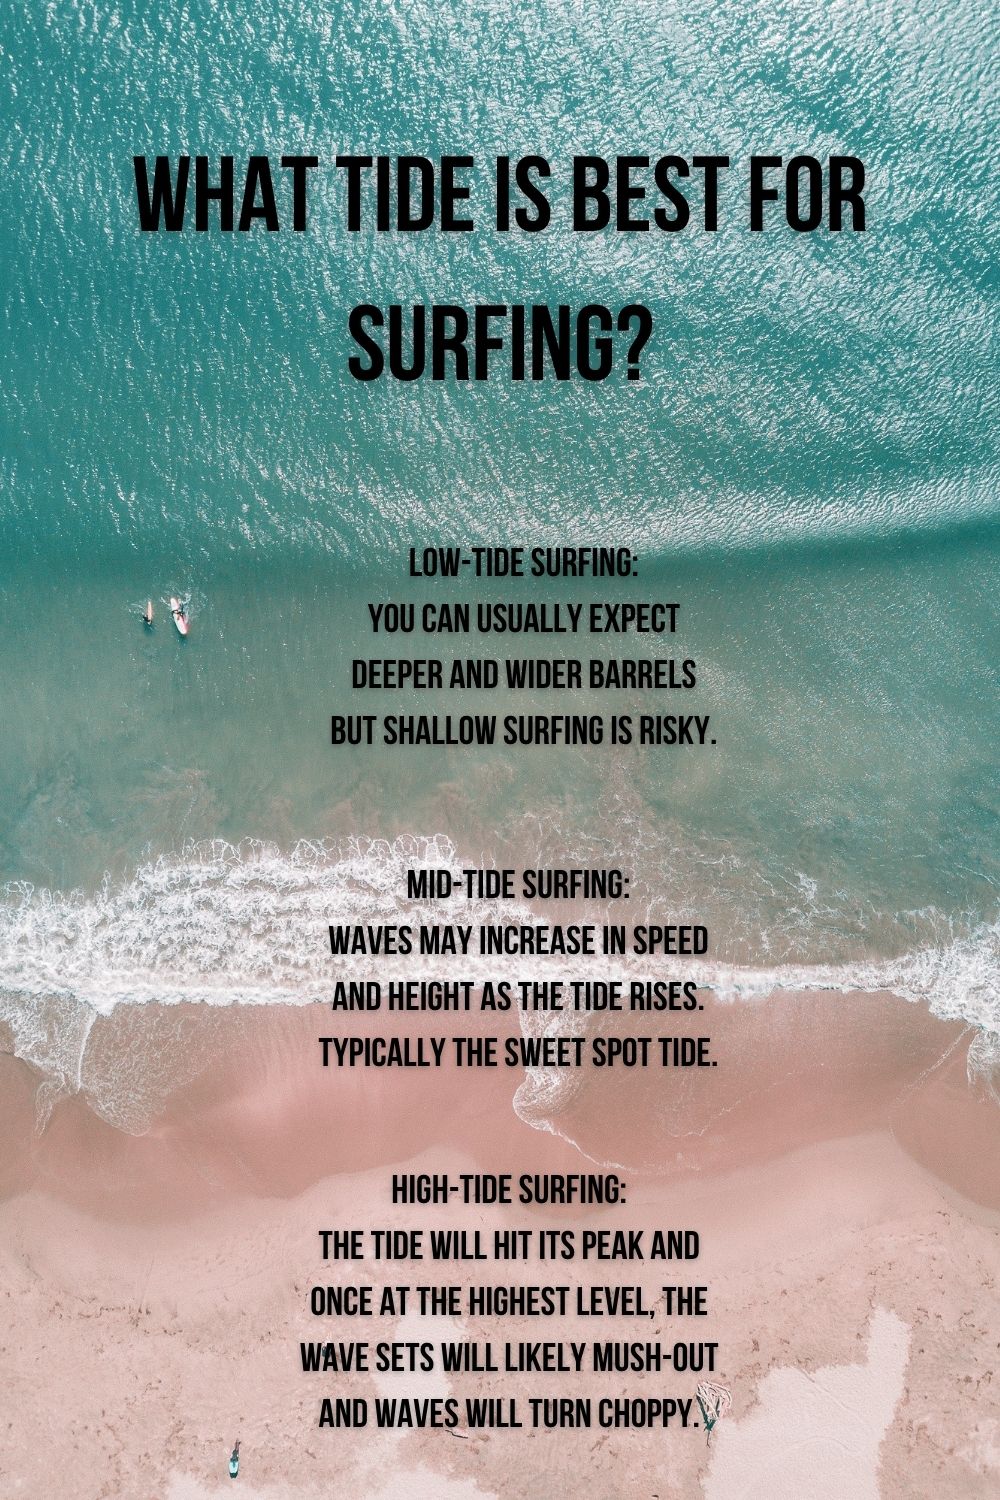 which tide is best for surfing